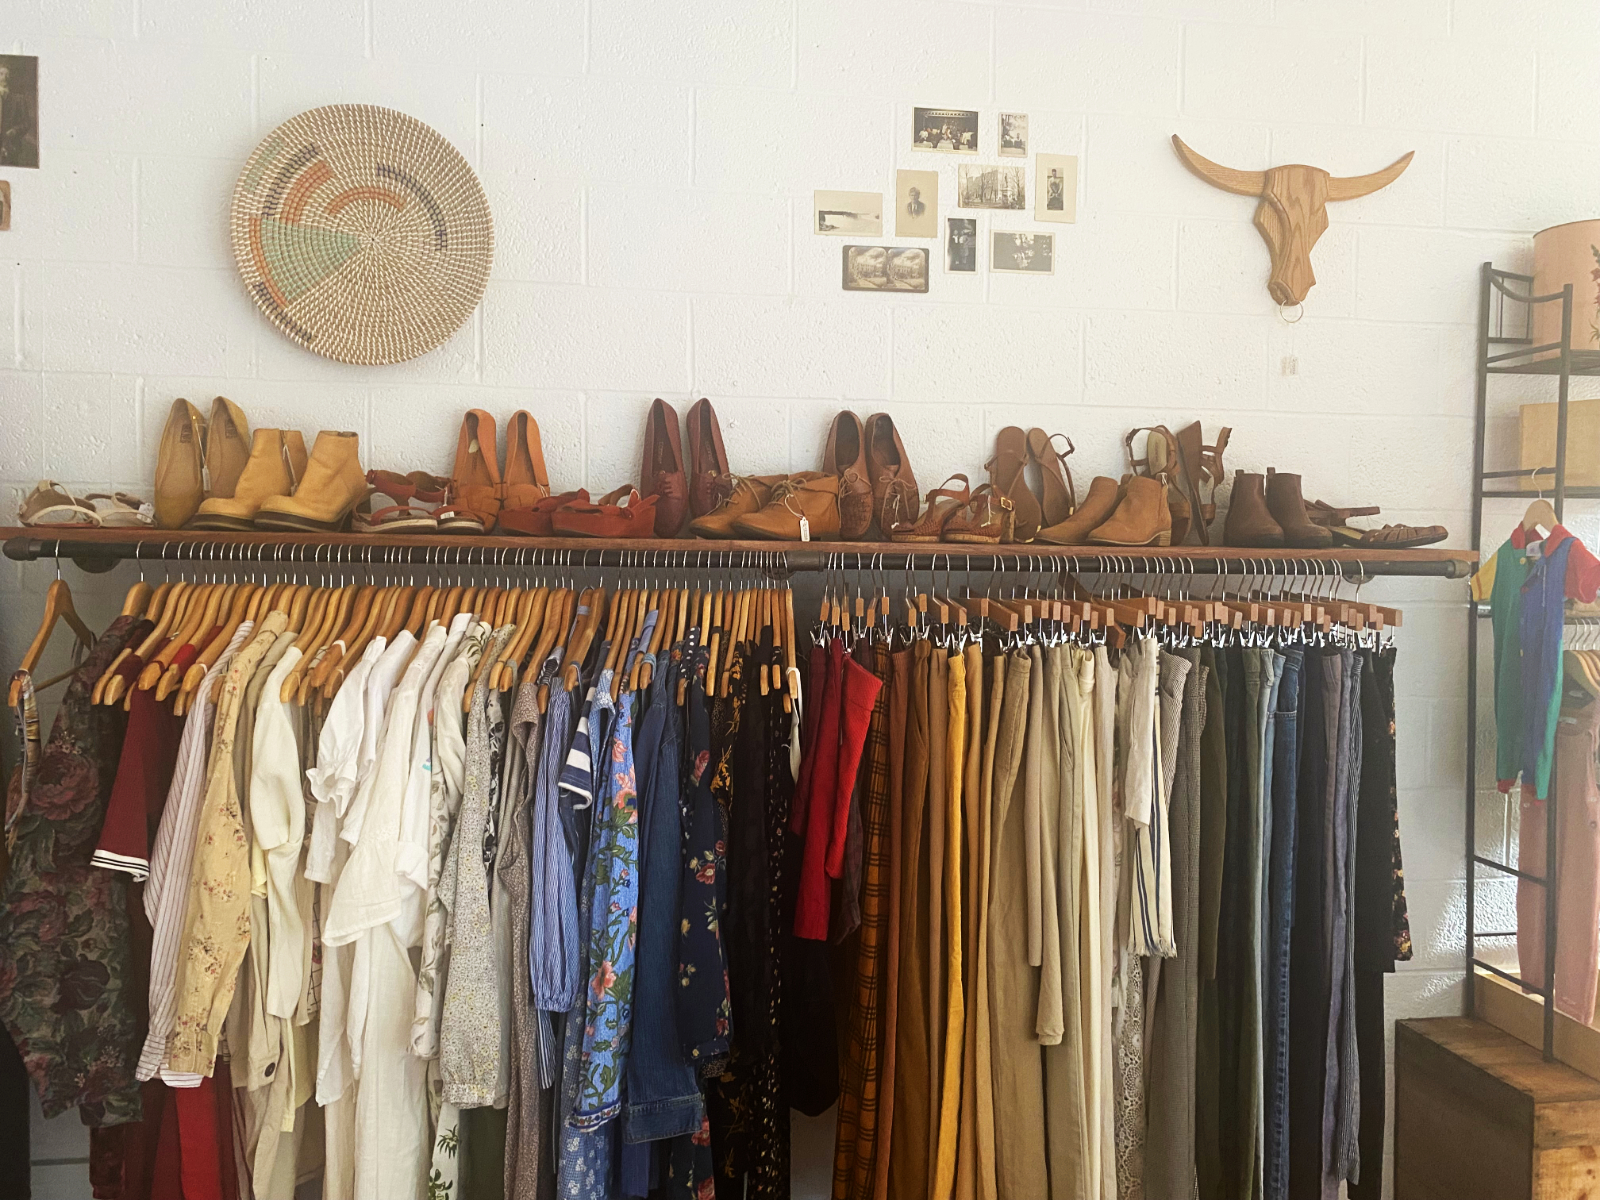 Photo of a rack of clothing.